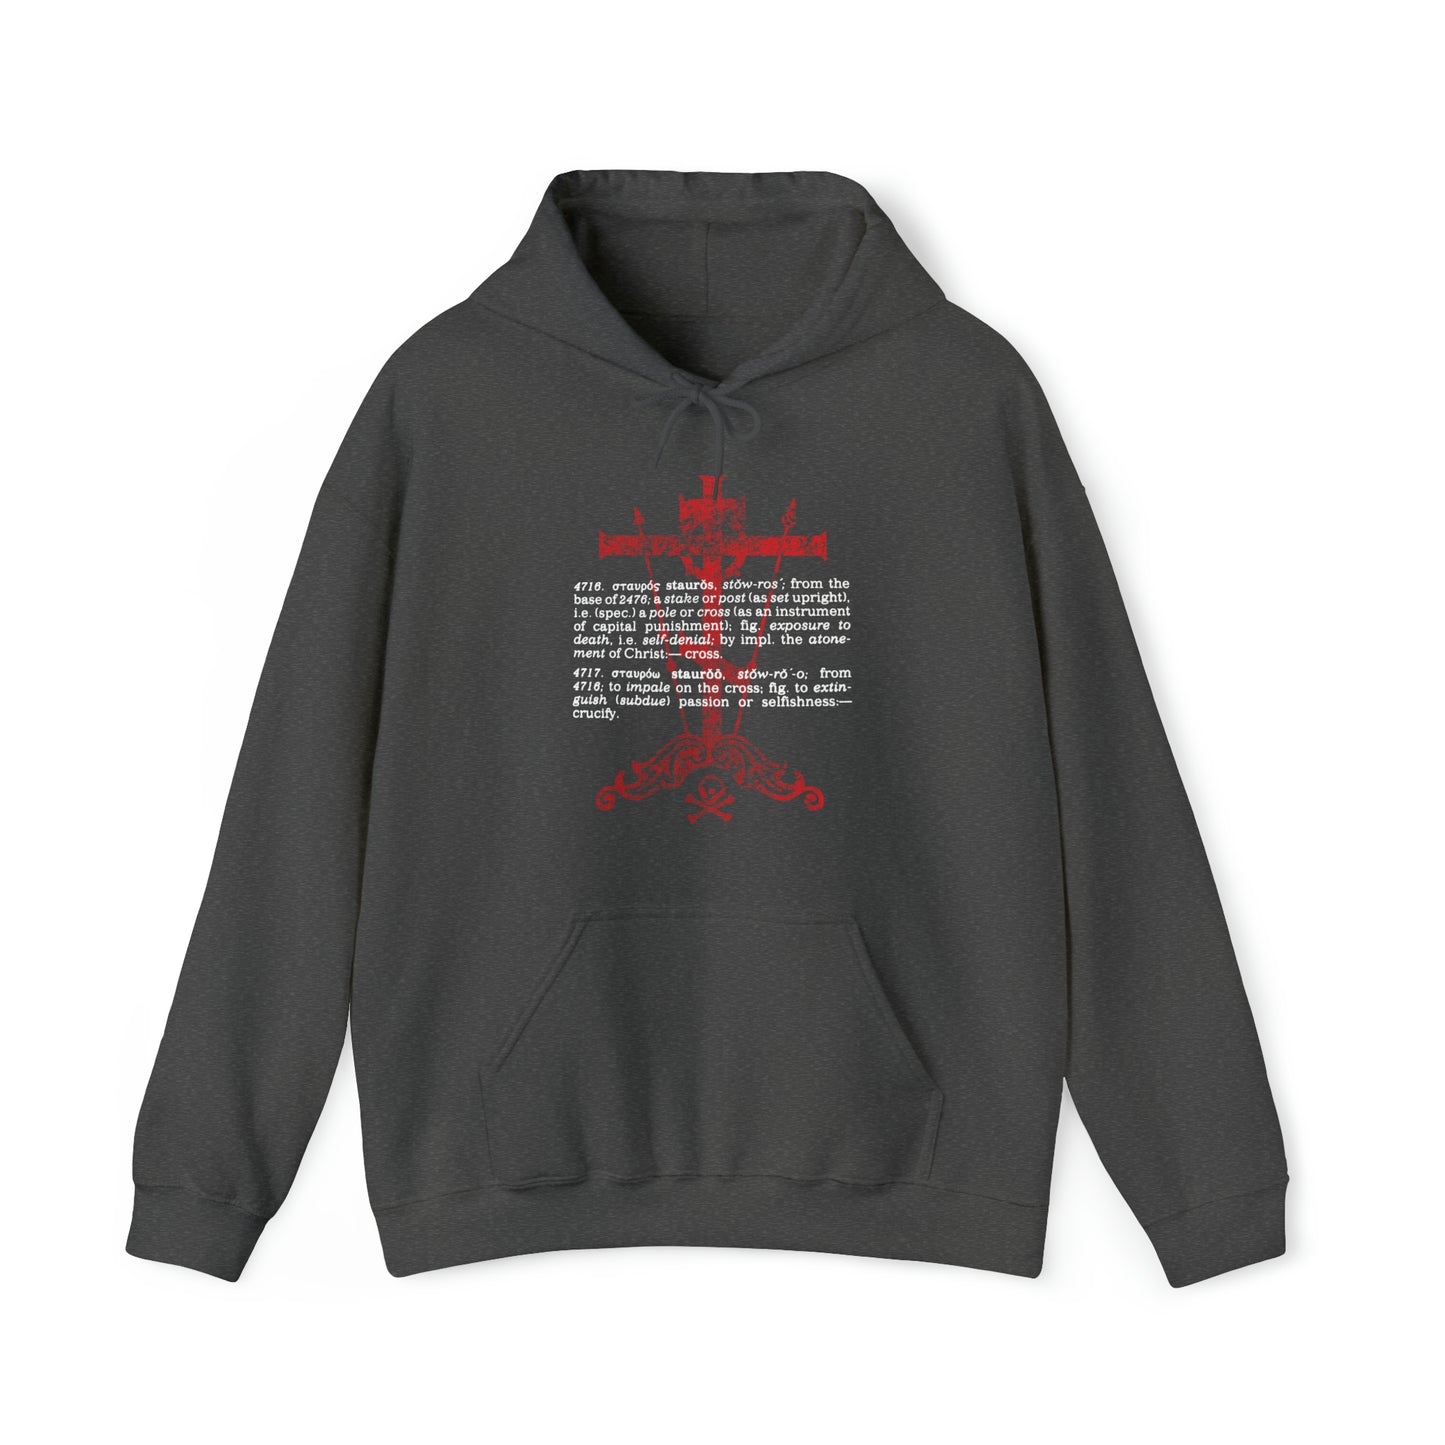 The Cross: To Extinguish Passion (Strong's Definition) No. 1 | Orthodox Christian Hoodie / Hooded Sweatshirt